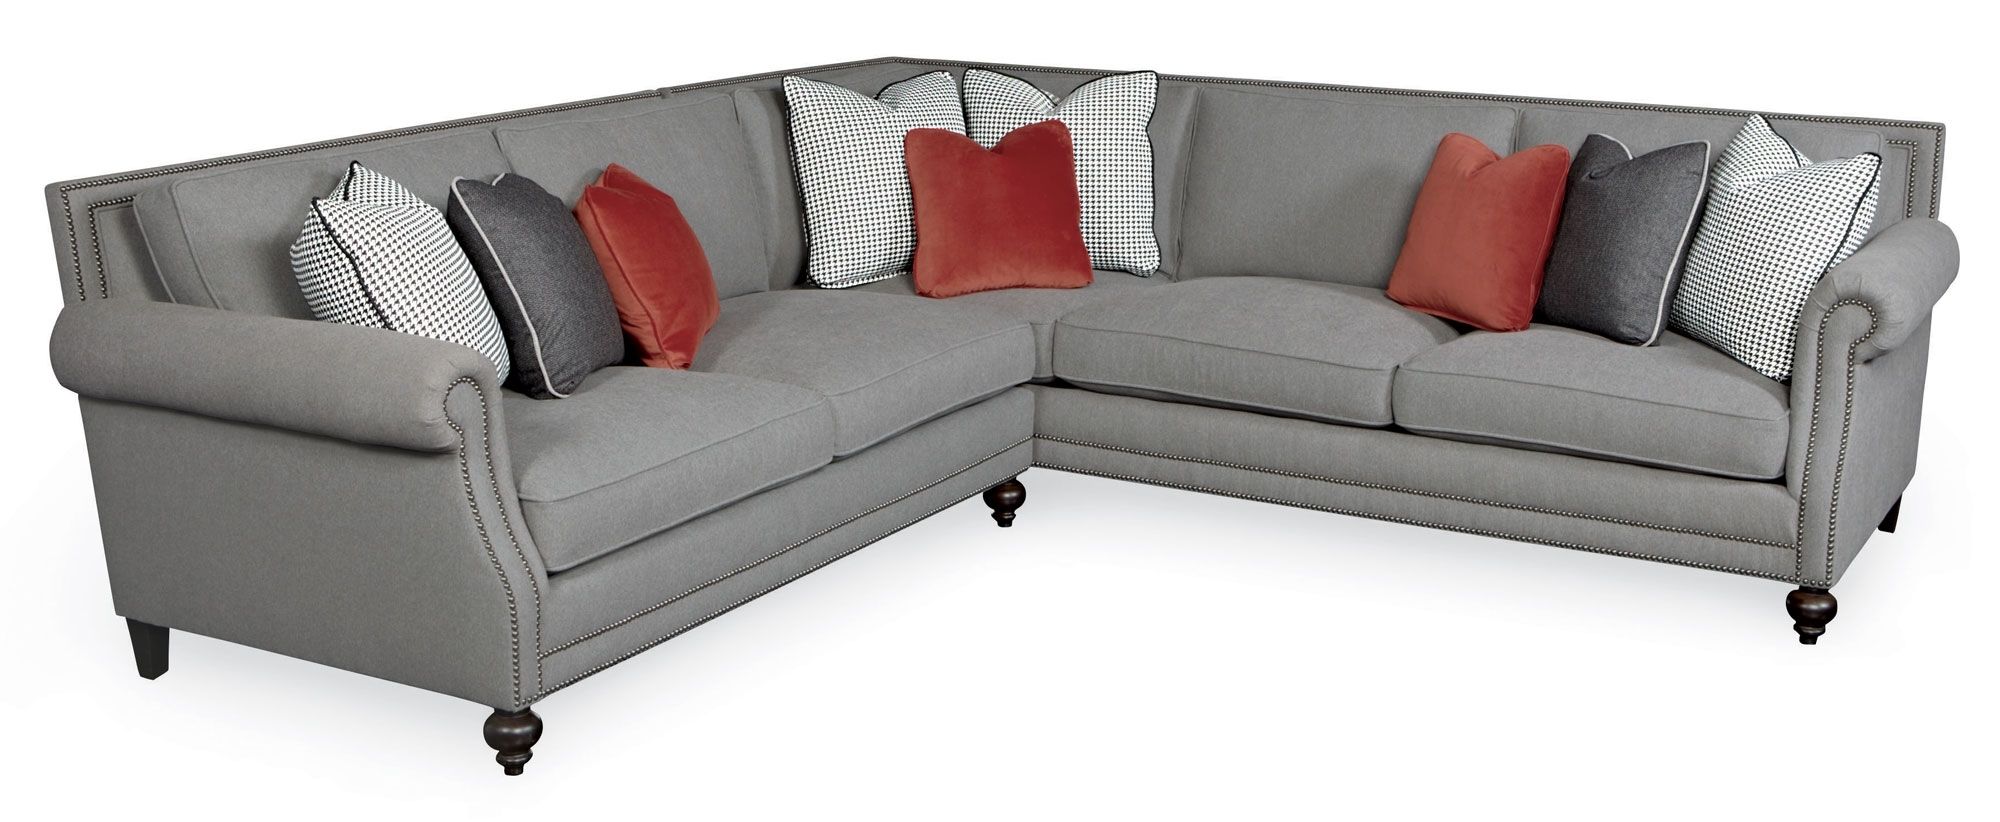 Sectional Sofa Design: Nailhead Sectional Sofa Fabric Leather Chaise Intended For Sectional Sofas With Nailhead Trim (View 10 of 10)